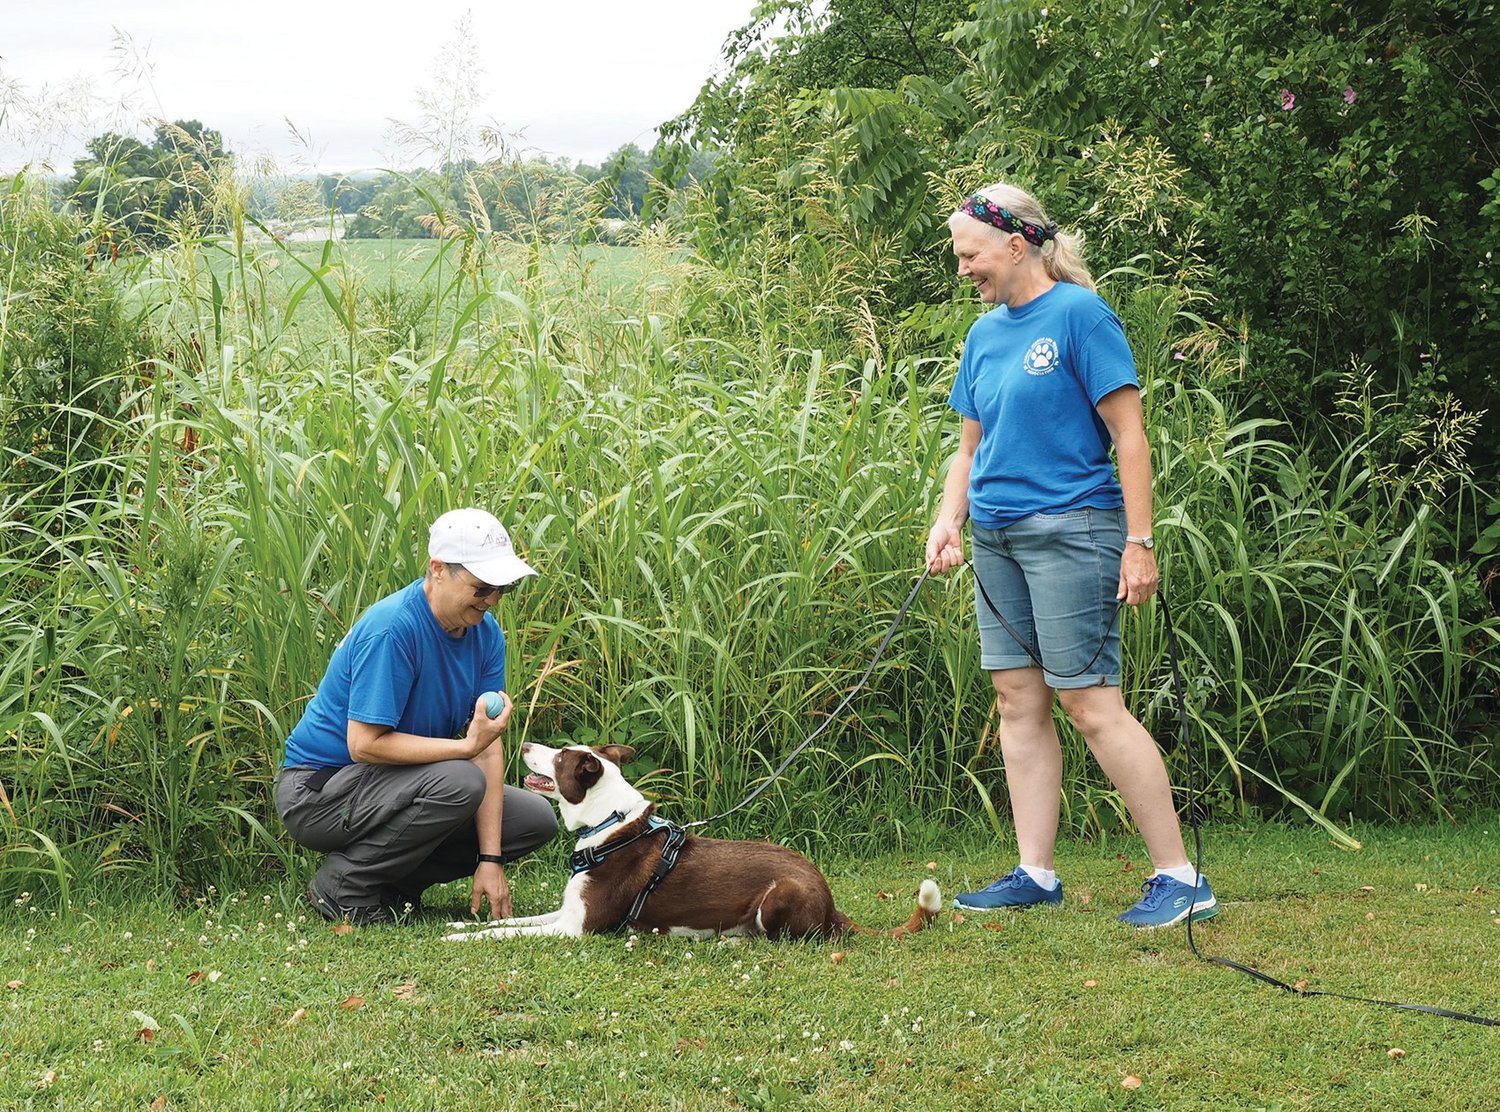 SUCCESSFUL FIND — Border Collie Juno, a tracking and trailing search dog, owned by Glenda Eichmeyer, right, has successfully located team member Jackie Bross, left. Bross is rewarding Juno for a job well done by allowing Juno to play with the toy of her choice as a reward. Search and rescue dogs were honing their skills in a training held Saturday, July 9.